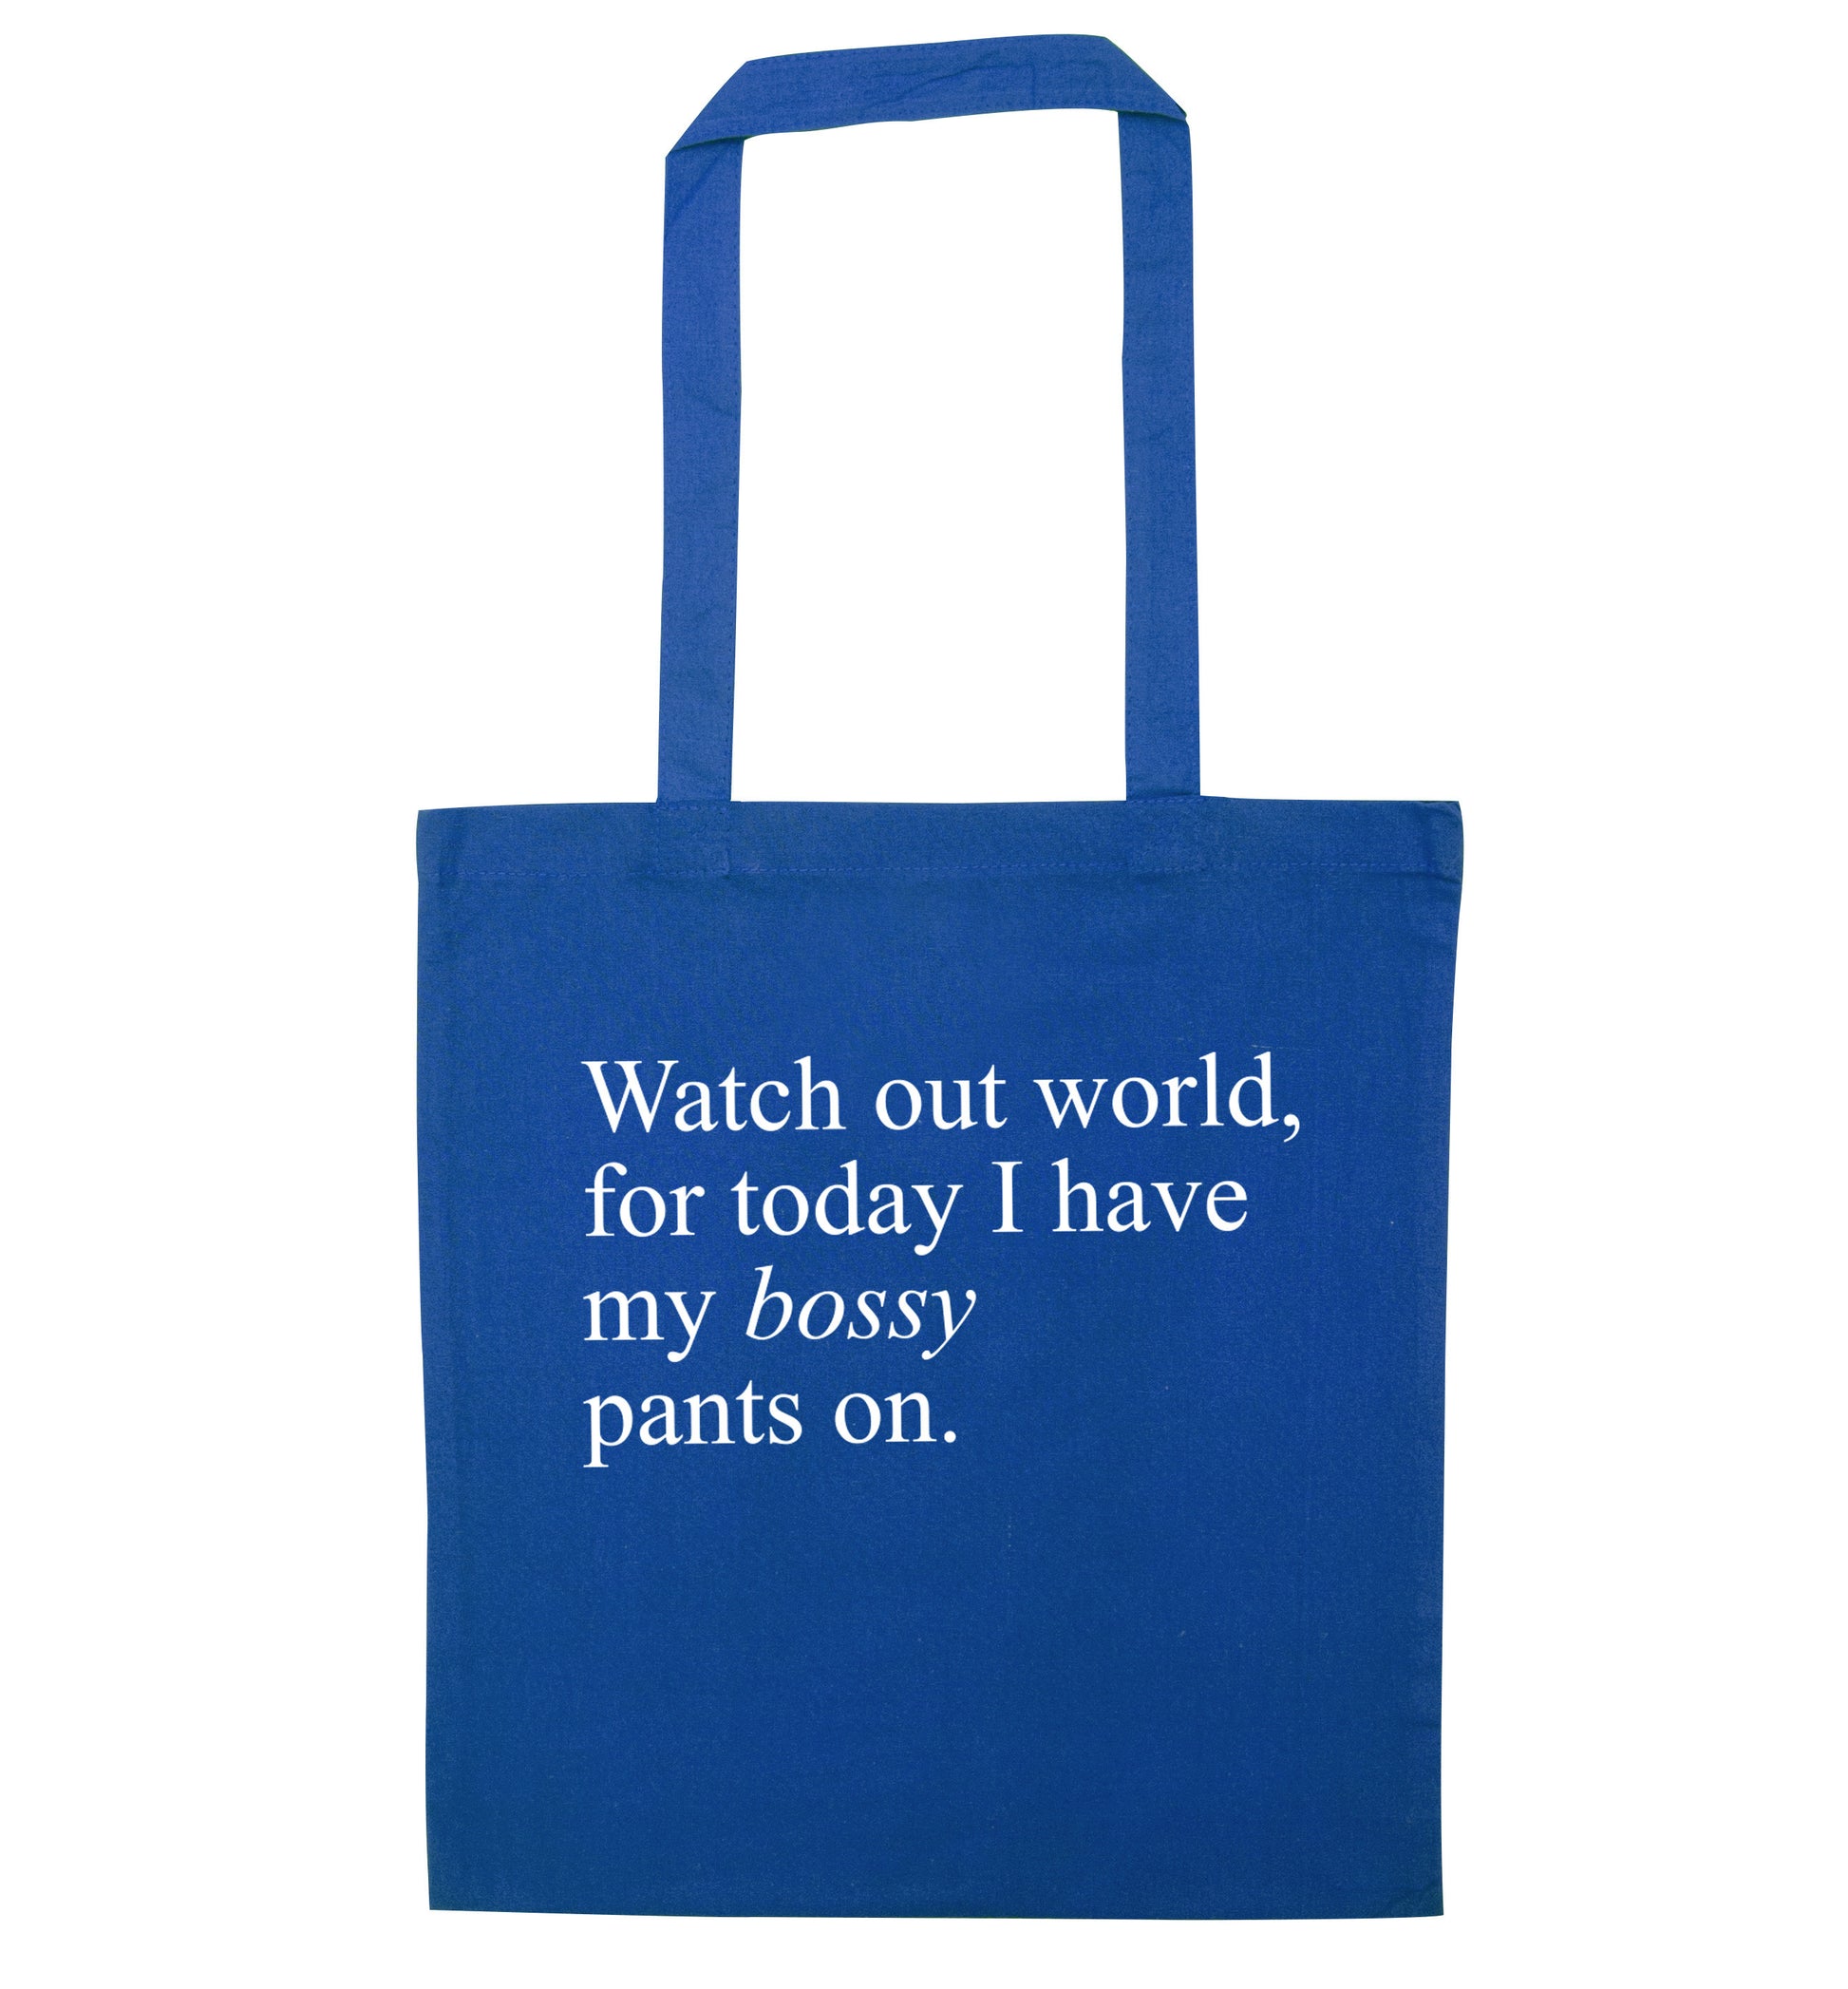 Watch out world, for today I have my bossy pants on blue tote bag